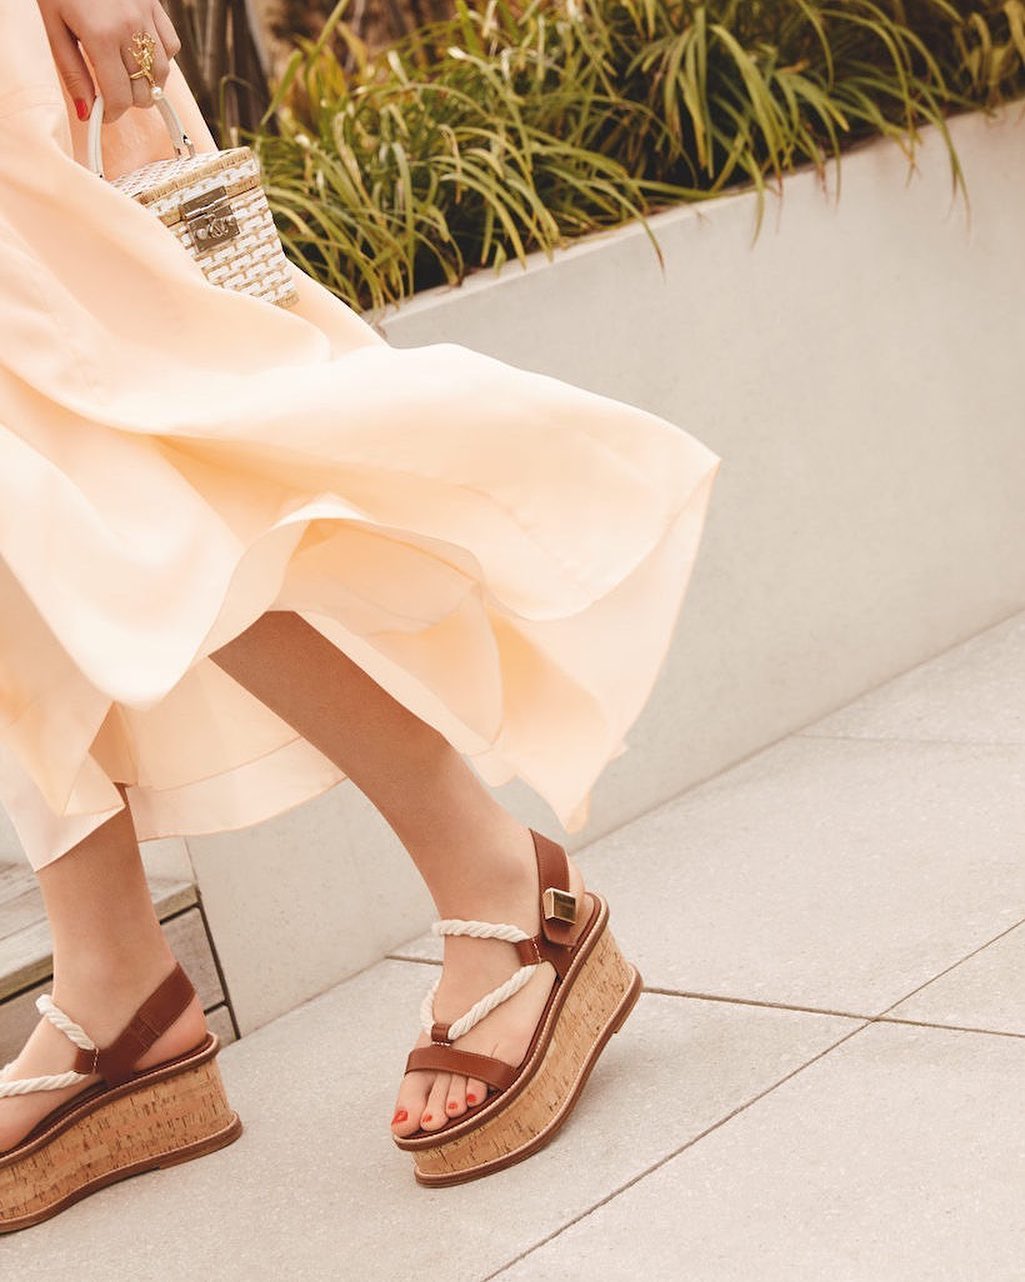 Harrods - The sky’s no limit where must-have flatforms are concerned. Neutral hues and natural textures bring a summer-ready feel to this practical silhouette, which promises all the elevation of a he...